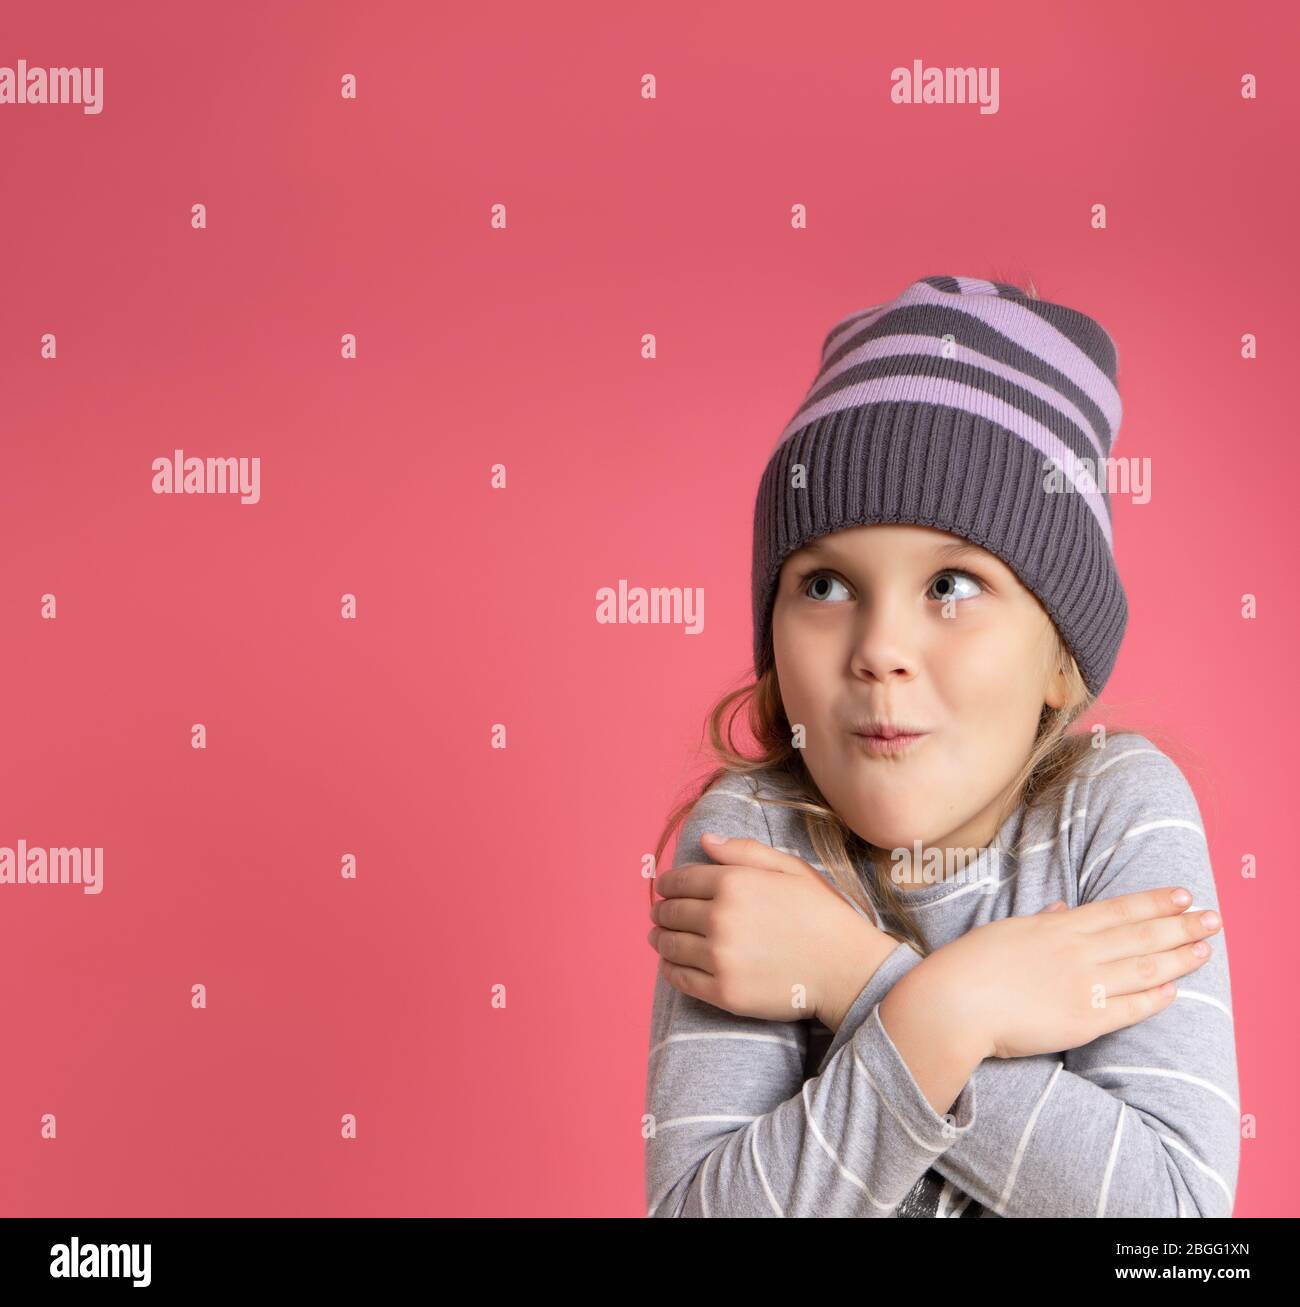 Little blonde girl in gray striped blouse and hat. She hugging herself, looking frozen, posing against pink studio background Stock Photo